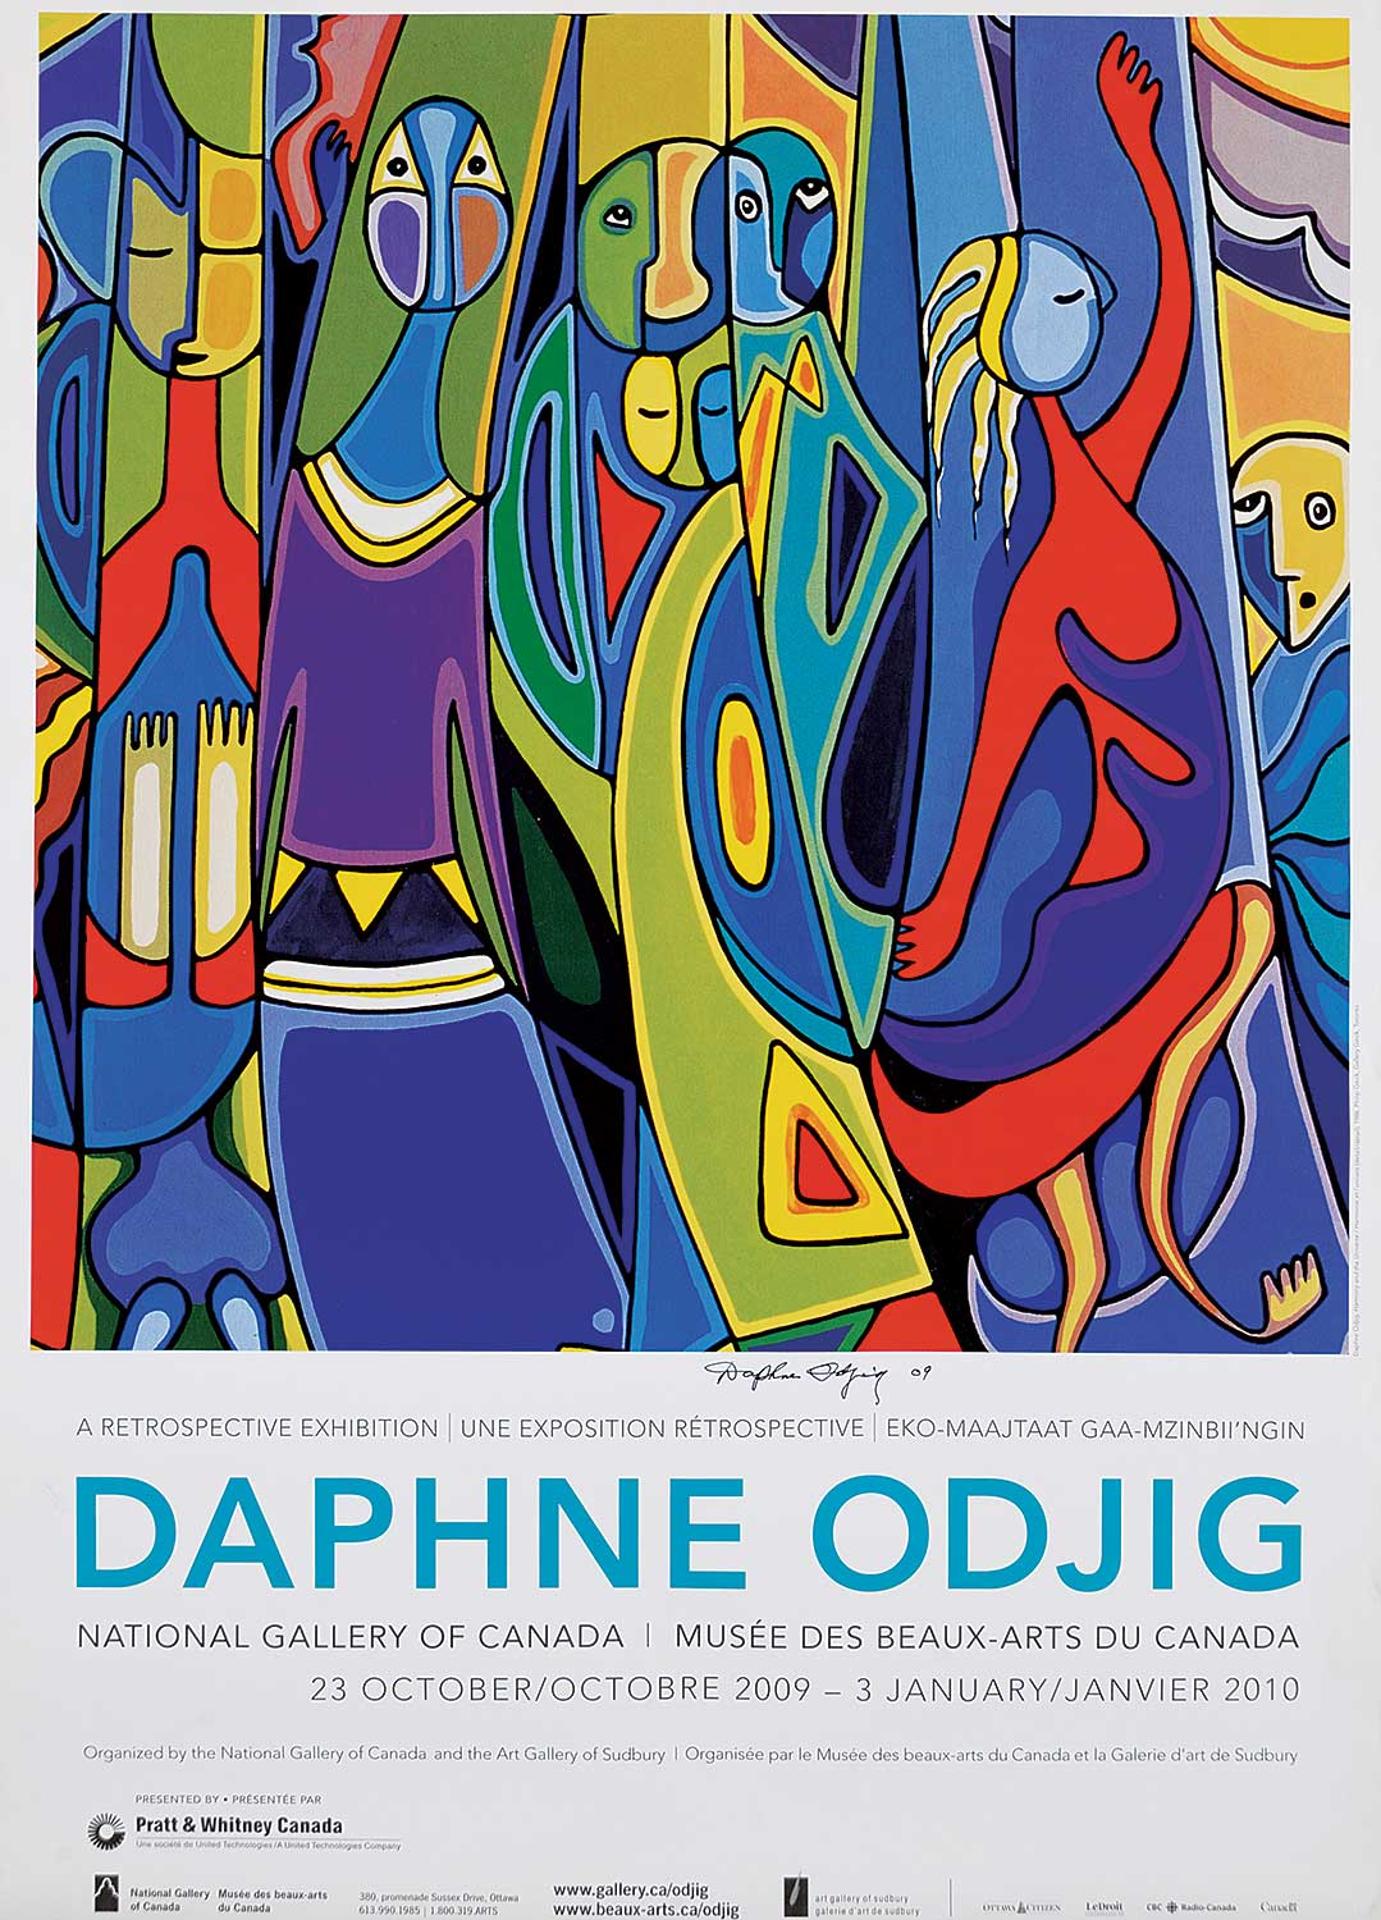 Daphne Odjig (1919-2016) - A Retrospective Exhibition - National Gallery of Canada